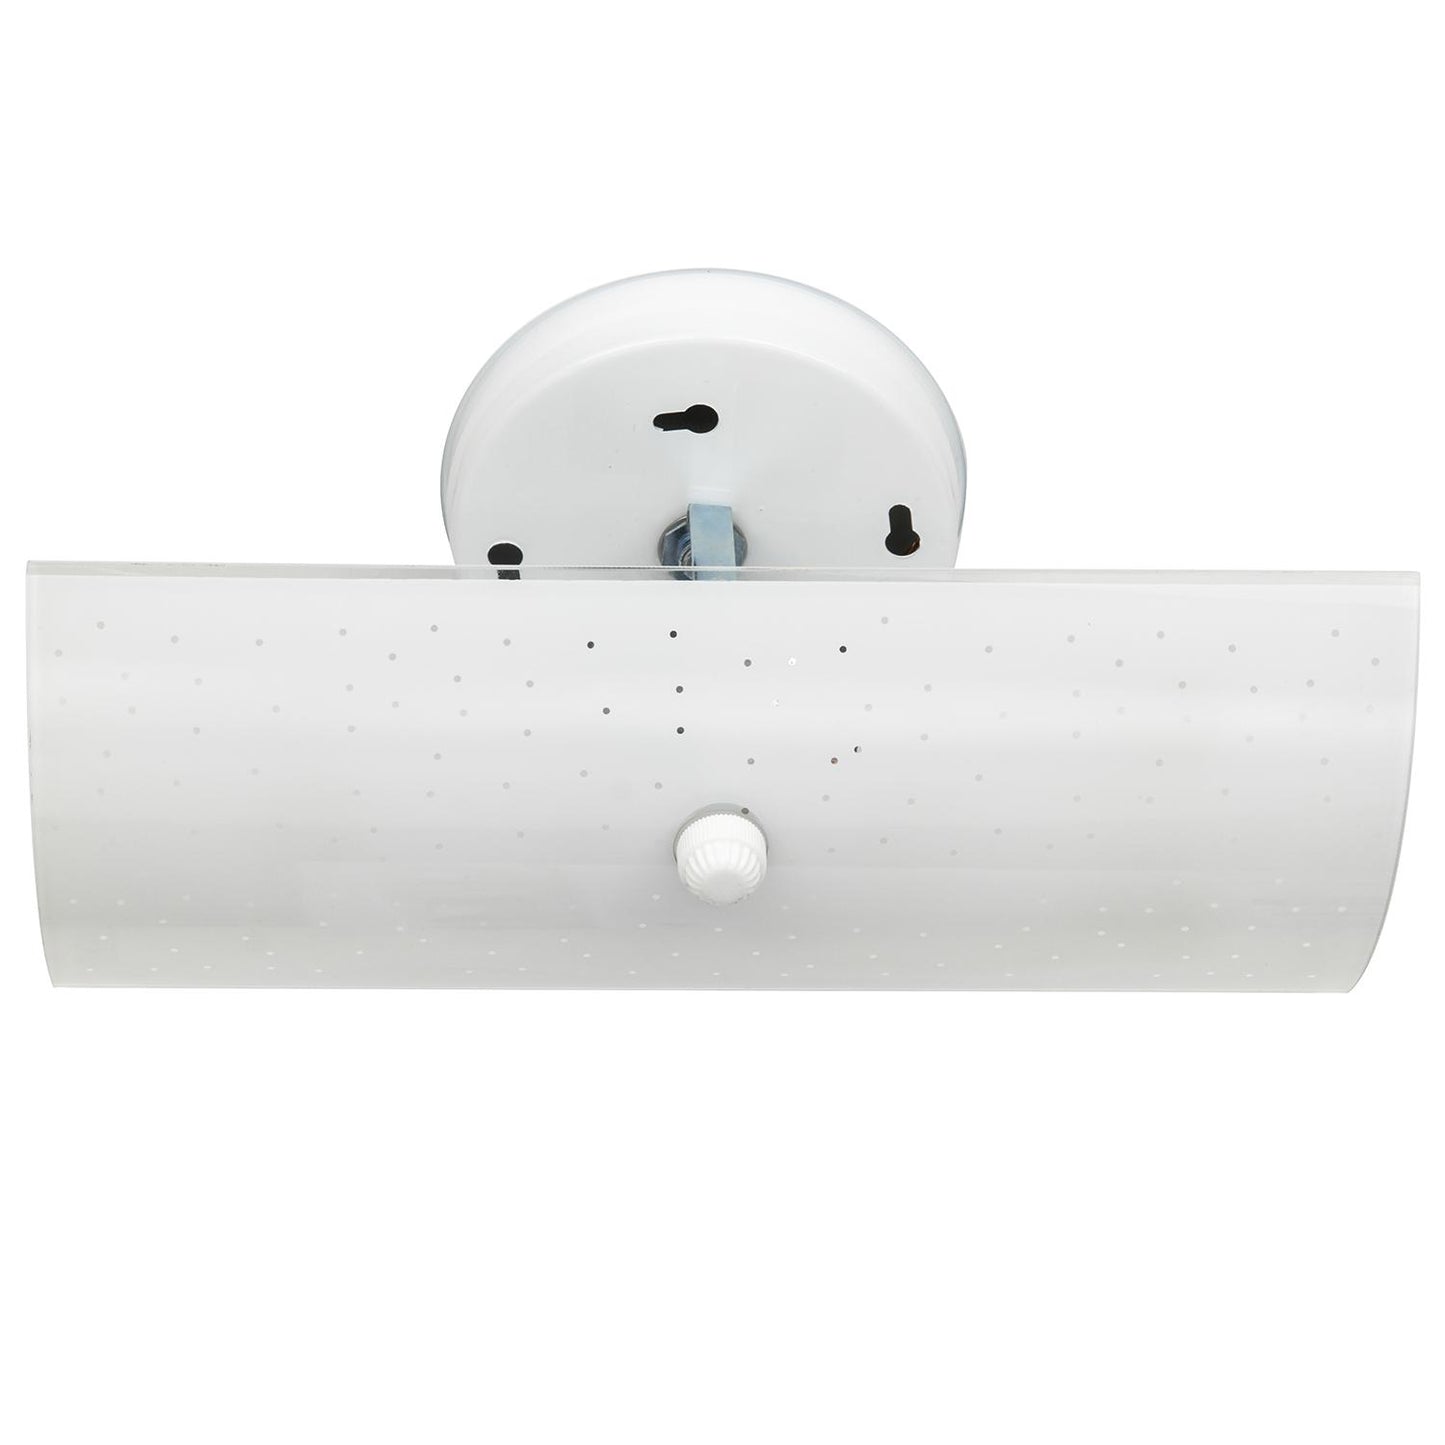 Sunlite - Dual Socket Wall Mounted Vanity Light Fixture, Frosted Glass Shade, White Finish